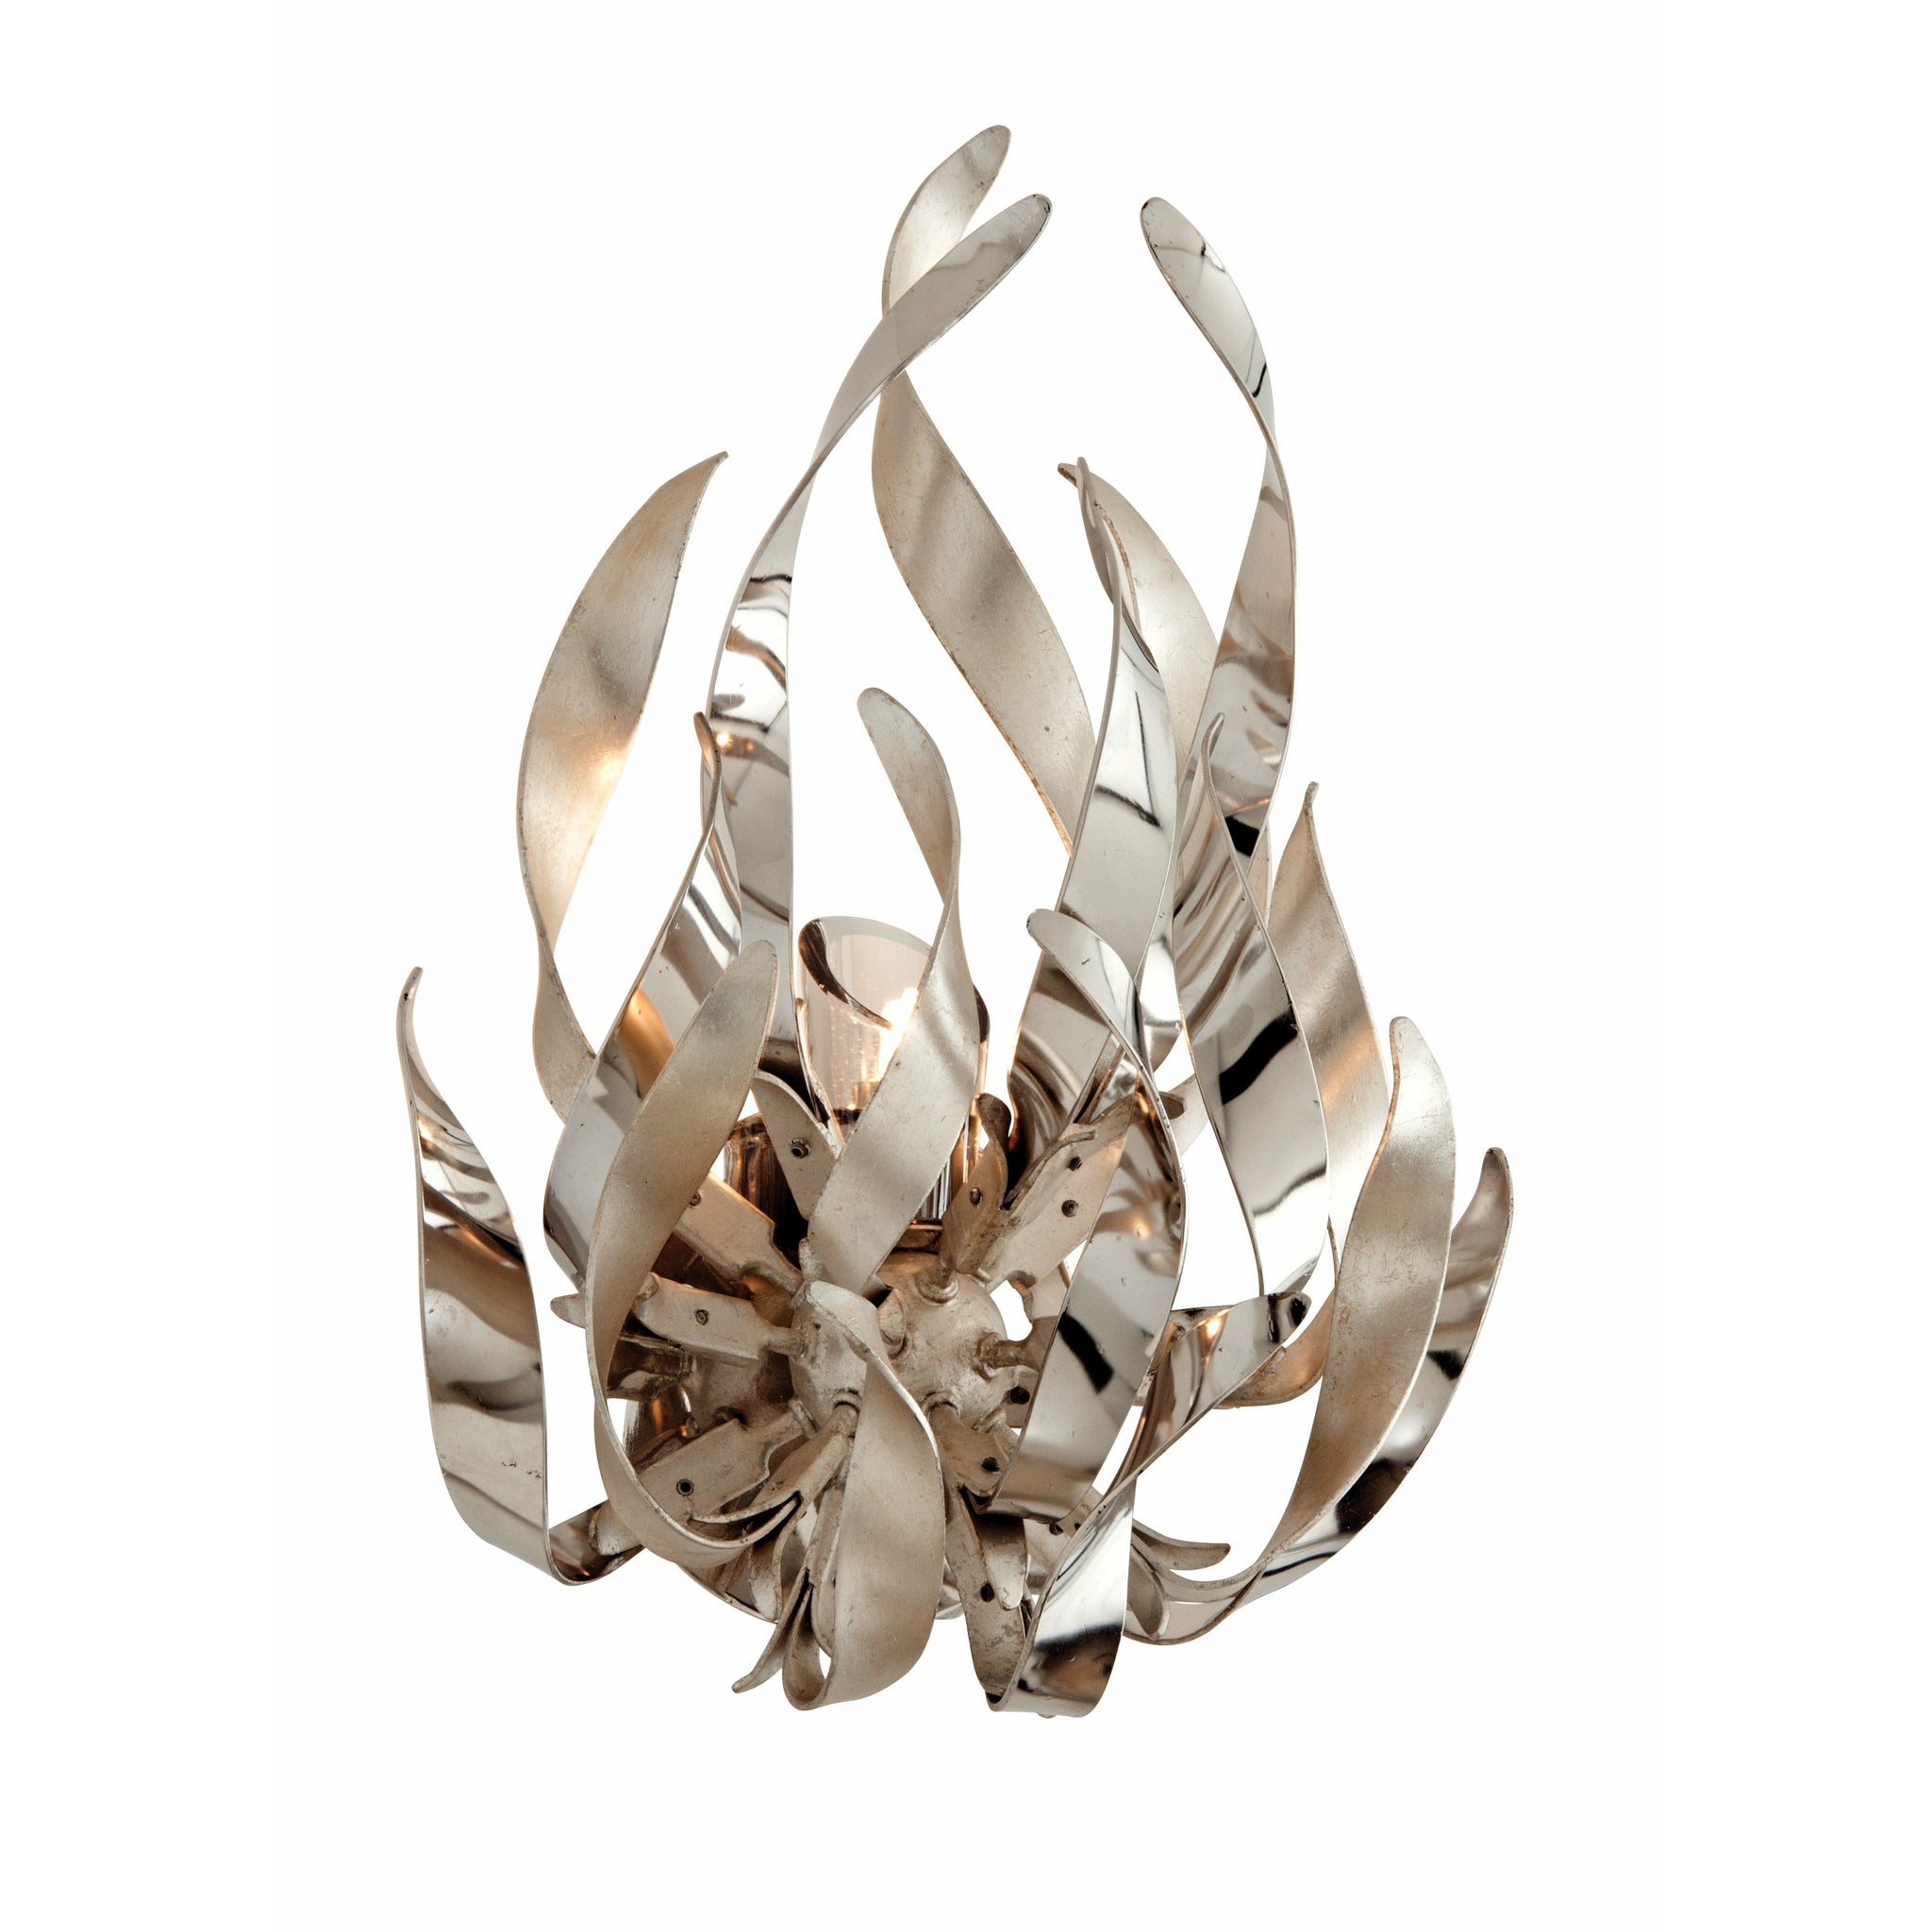 Graffiti Sconce Silver Leaf Polished Stainless